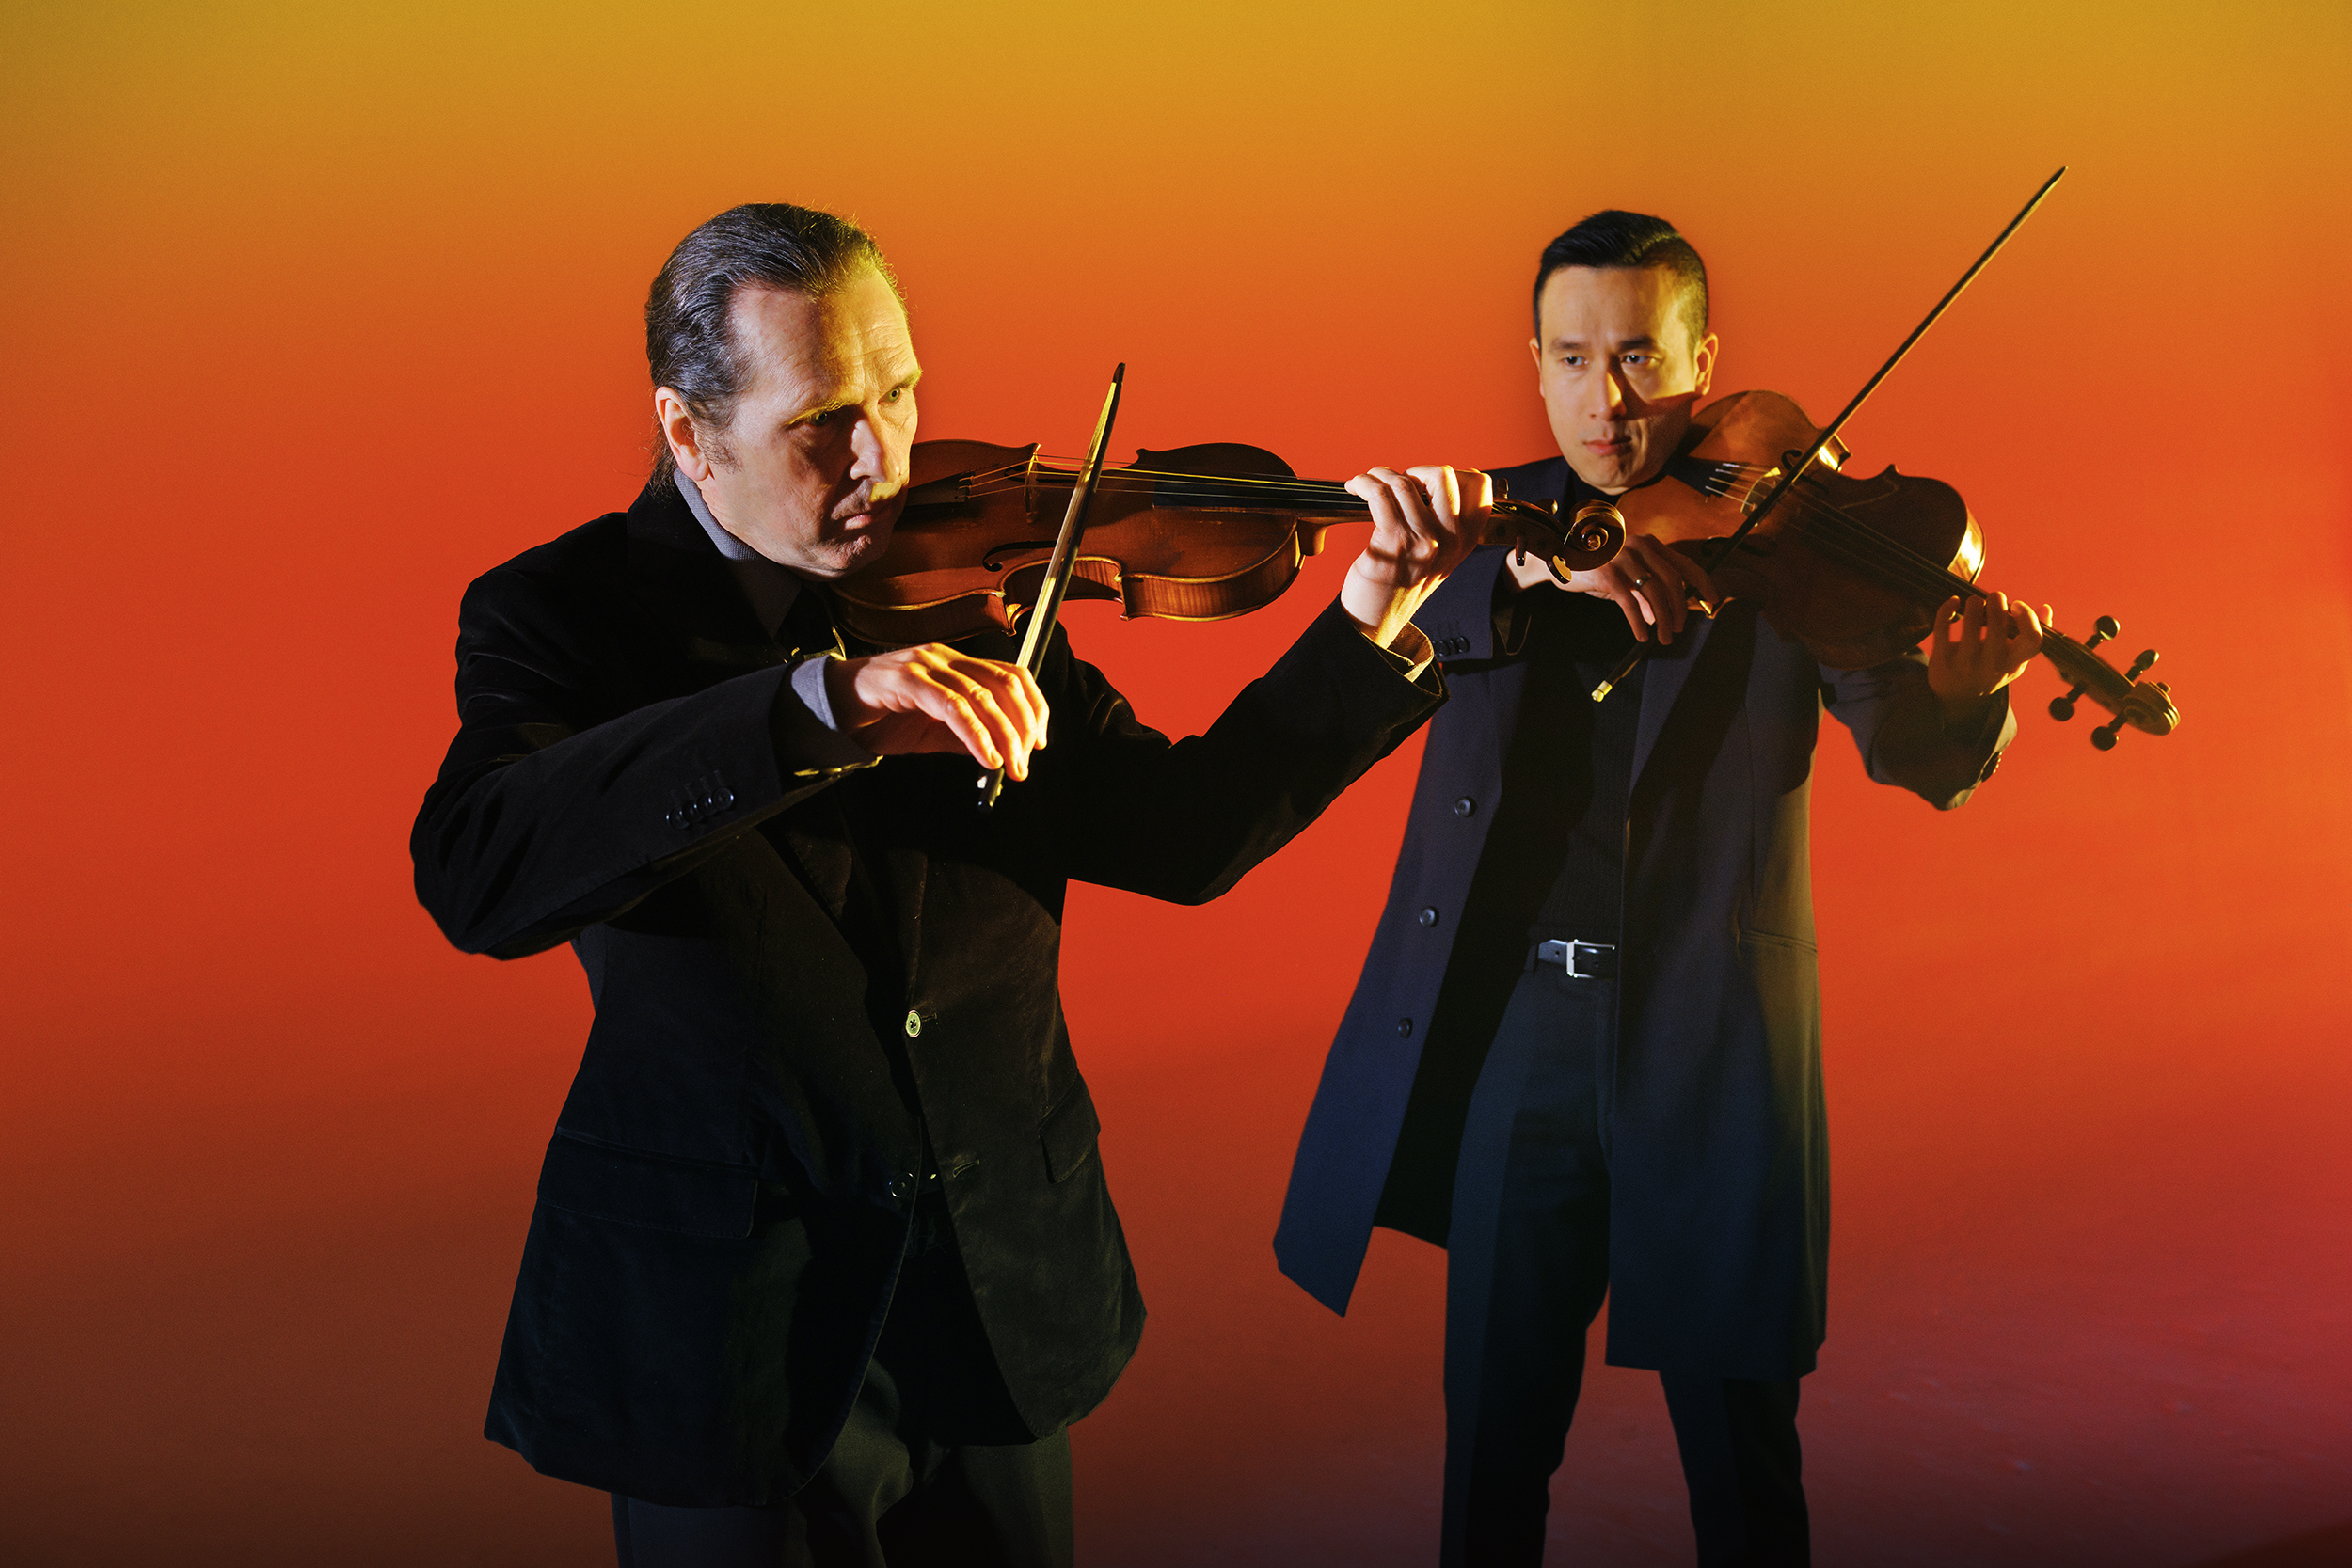 A violist and violinist posing with their instruments in a studio with a warm glow